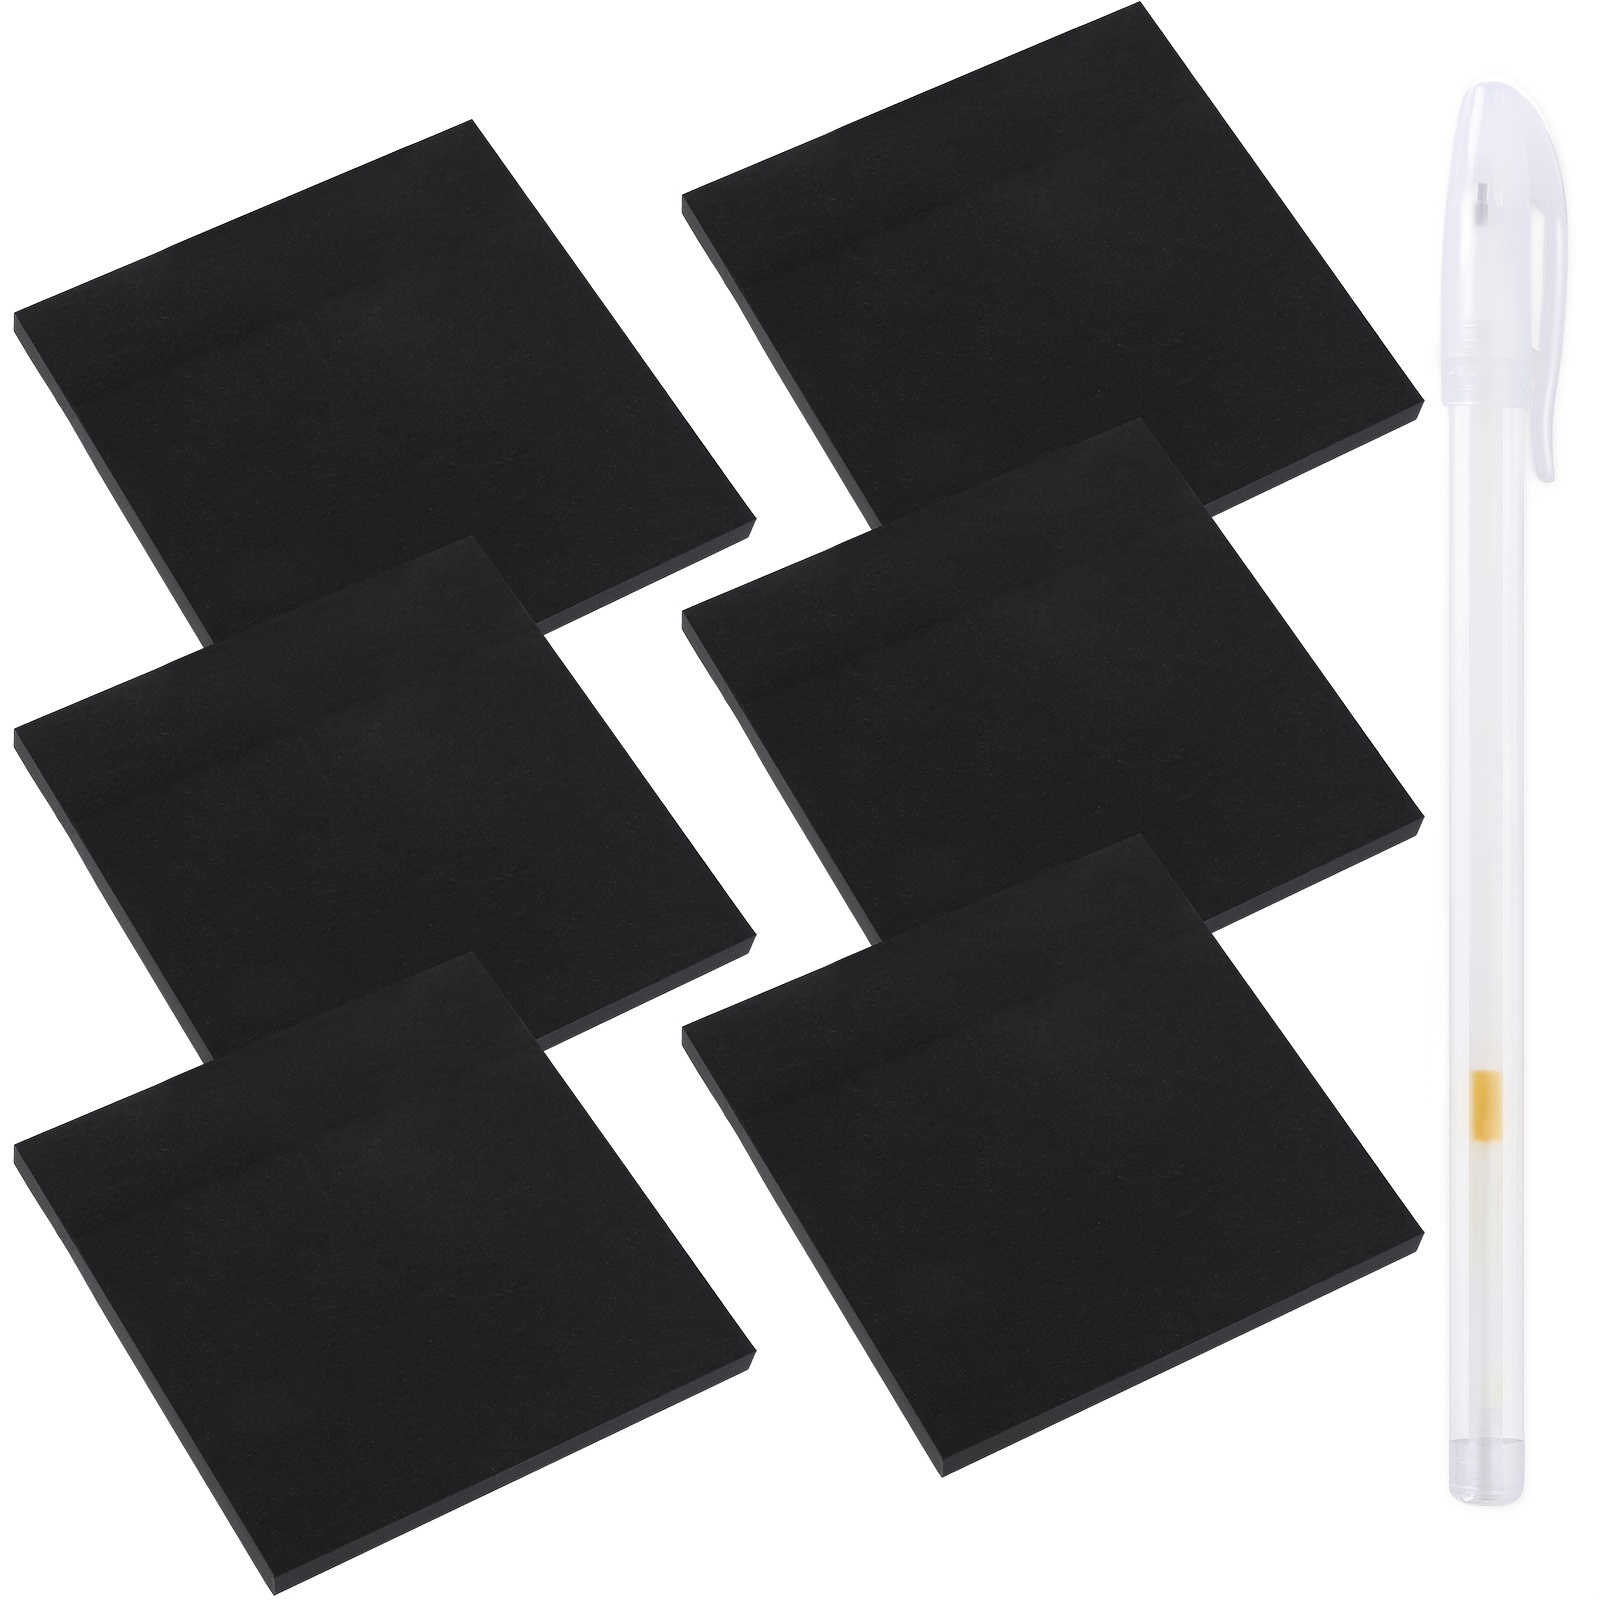 50sheets Black Sticky Notes Message Memo Pad Posted Its Note N